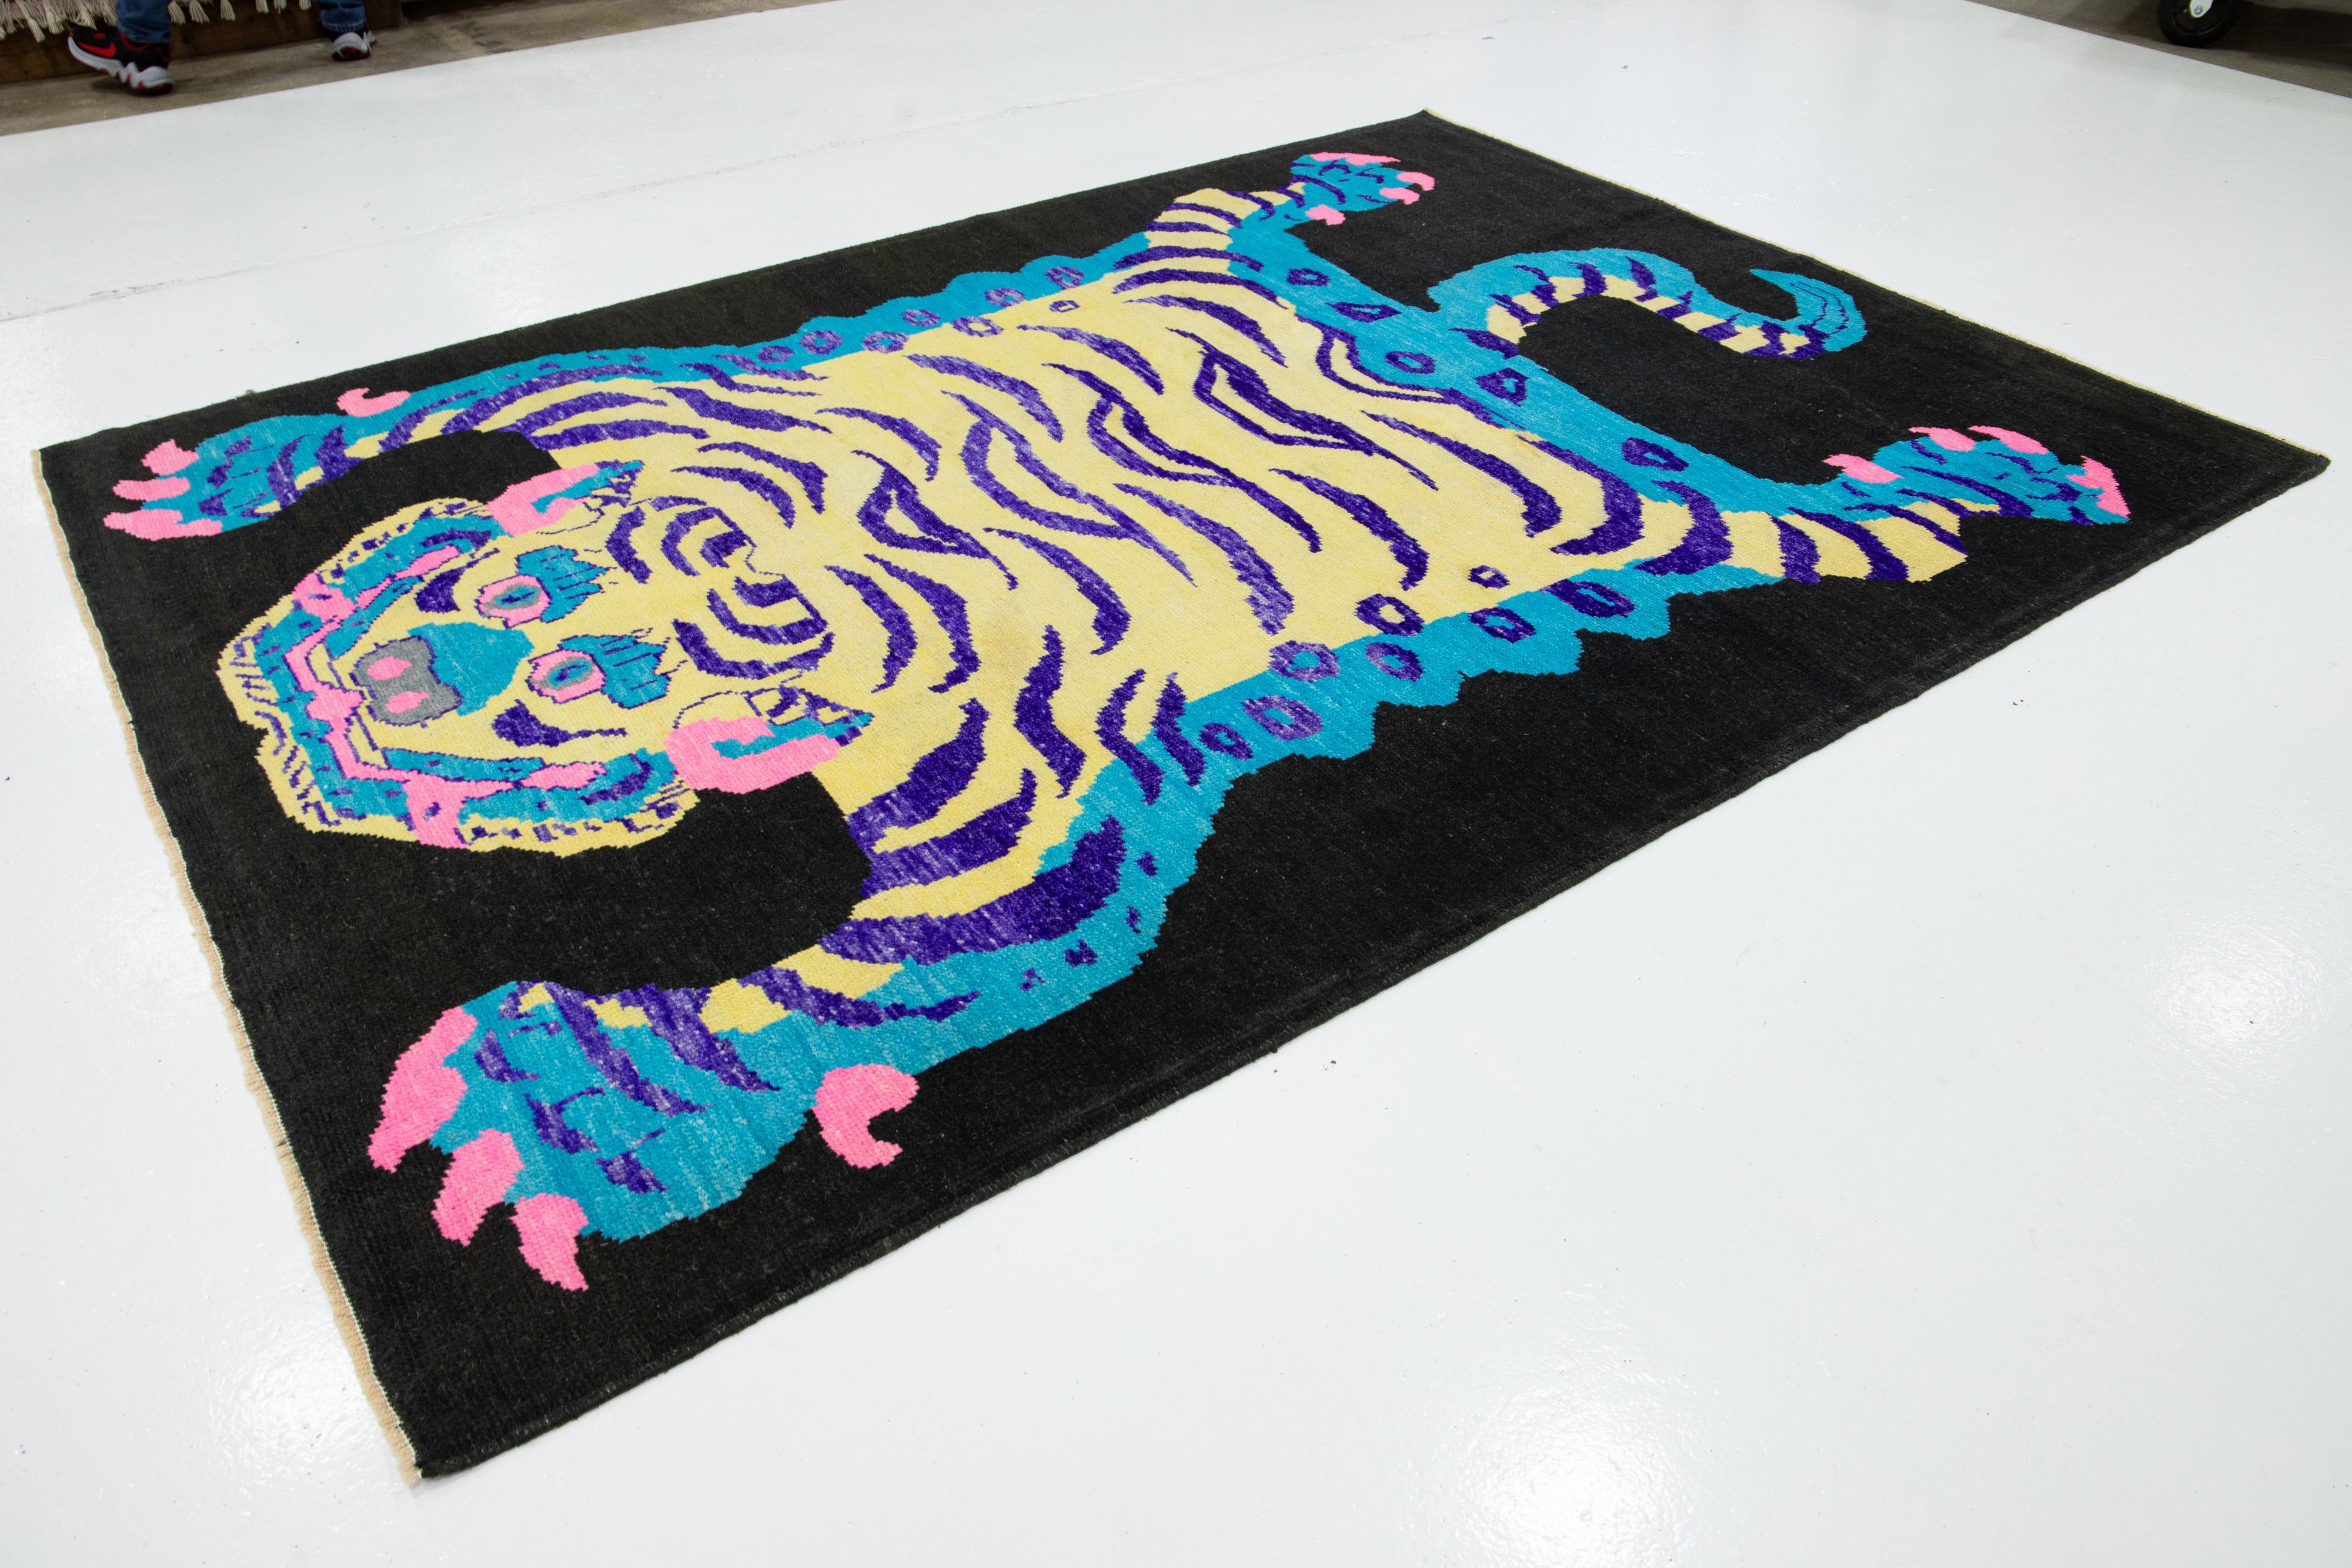 Modern Pictorial Designed Hand-Knotted Wool Rug In Black In New Condition For Sale In Norwalk, CT